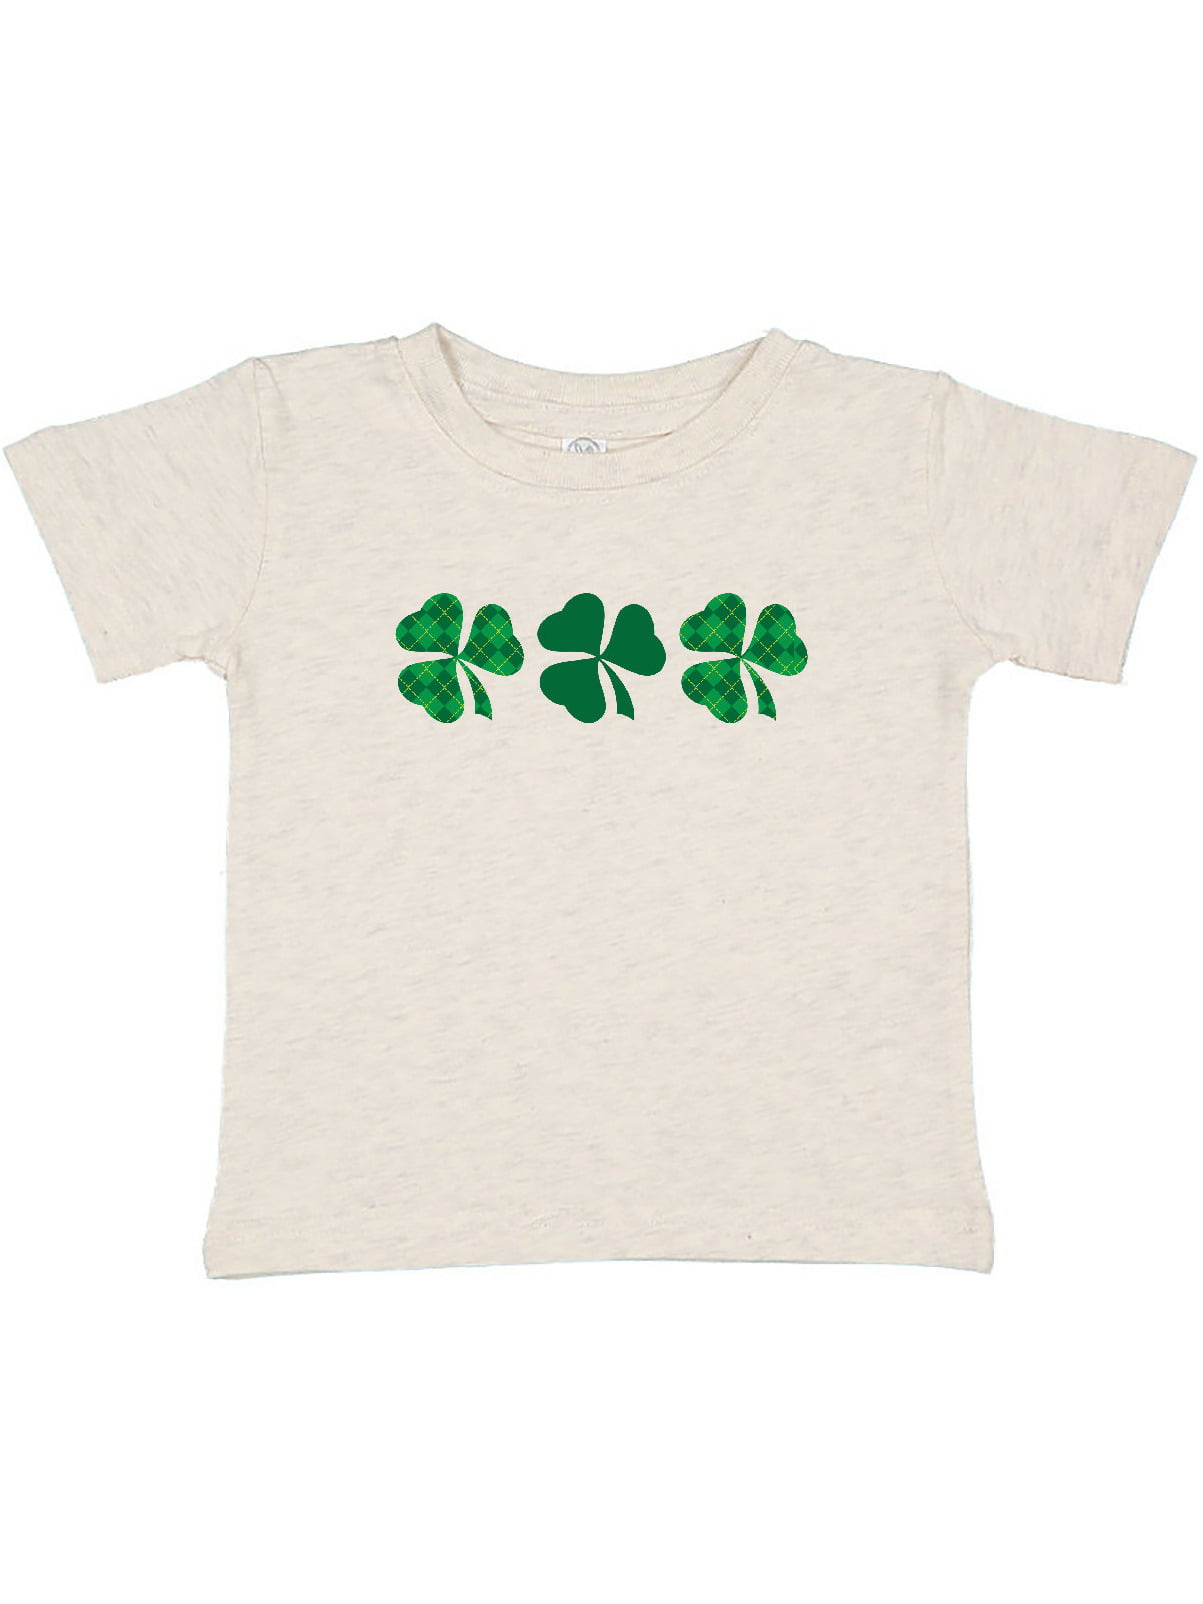 Pigeon with A Shamrock Short-Sleeves Tshirts Baby Boy 